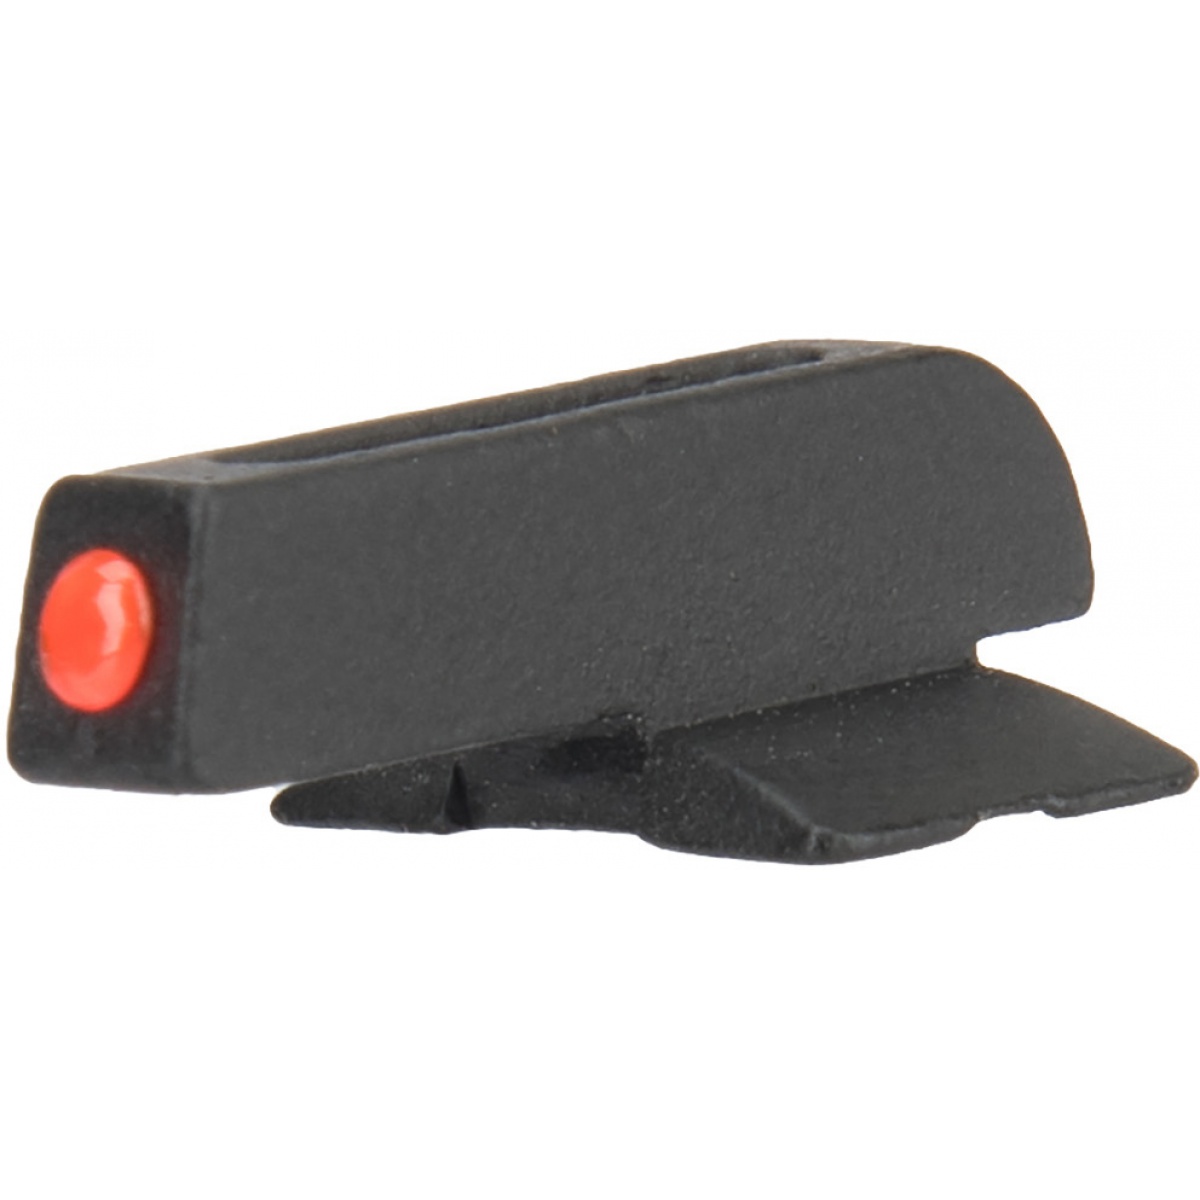 GBB ARMY-086 ARMY Airsoft Red Glow Fiber Front Sight For ARMY R28 1911 